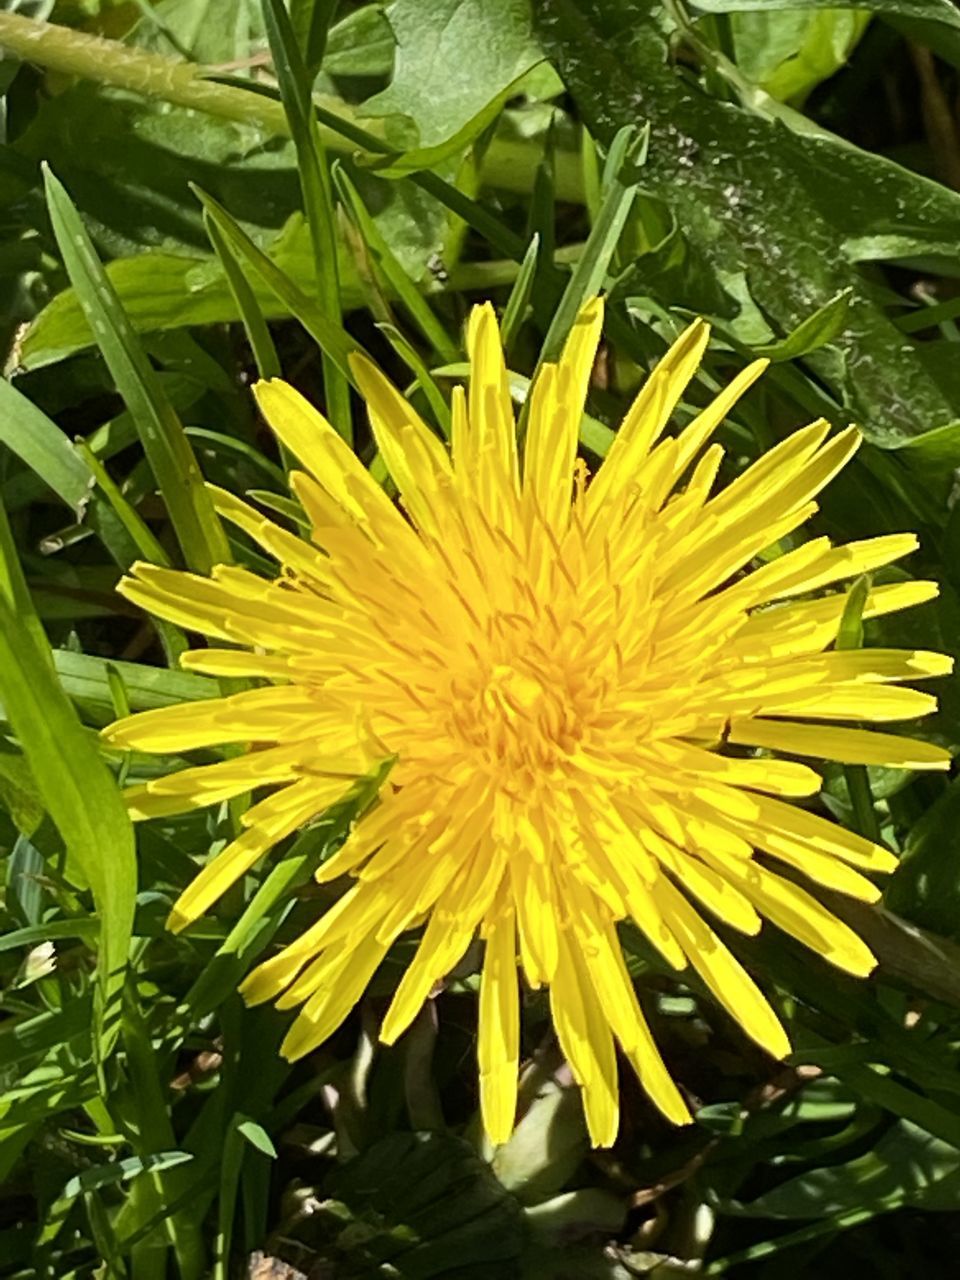 plant, flower, flowering plant, freshness, growth, beauty in nature, yellow, fragility, flower head, inflorescence, nature, close-up, petal, dandelion, green, leaf, plant part, no people, outdoors, springtime, day, botany, macro photography, wildflower